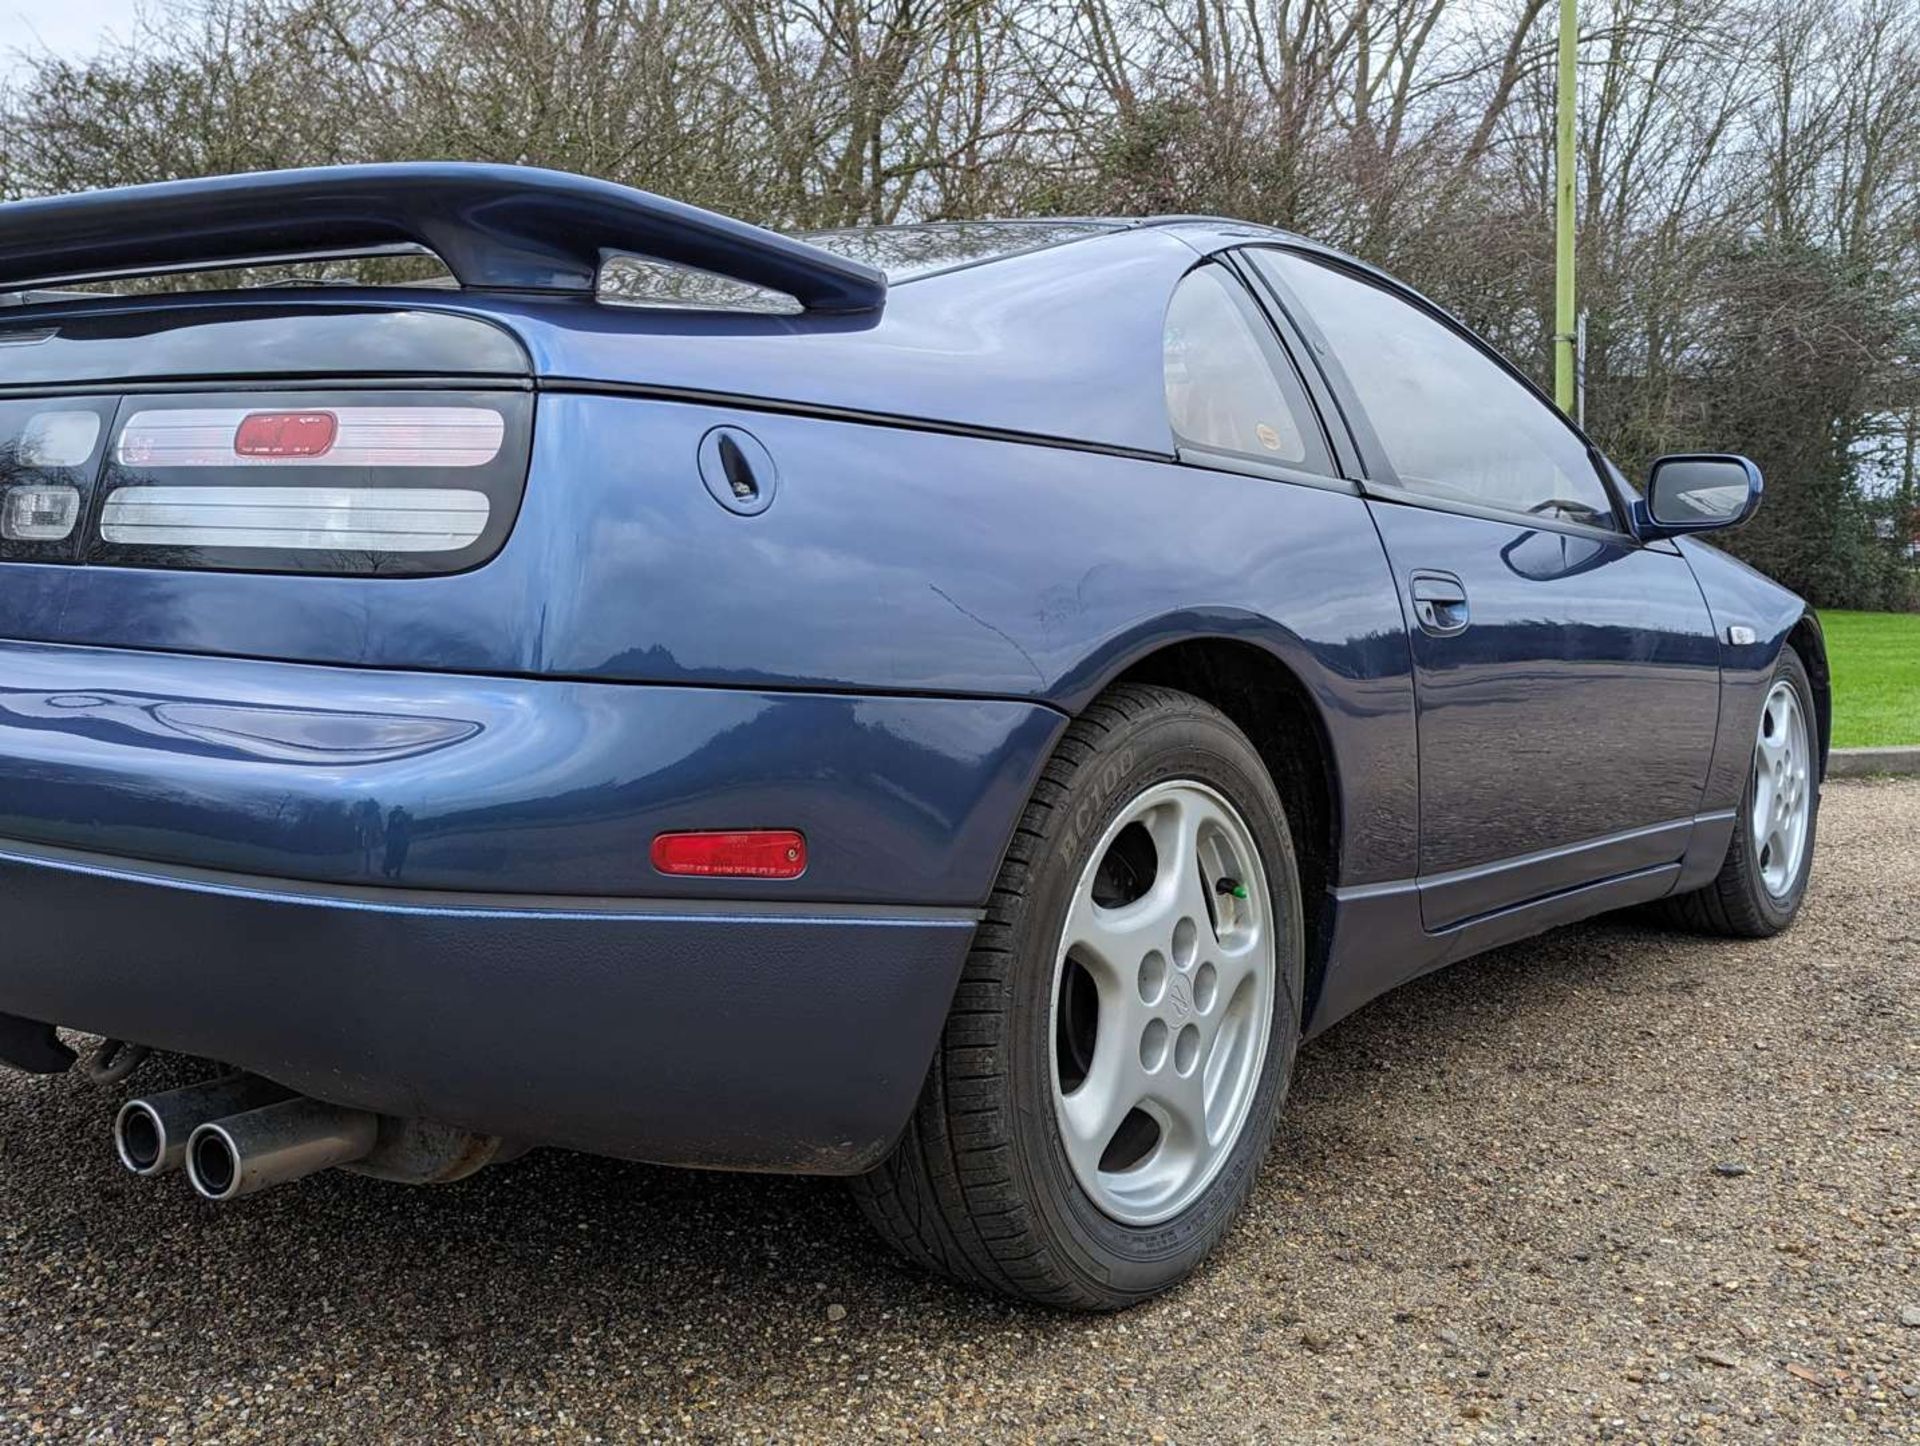 1992 NISSAN FAIRLADY 300ZX - Image 12 of 29